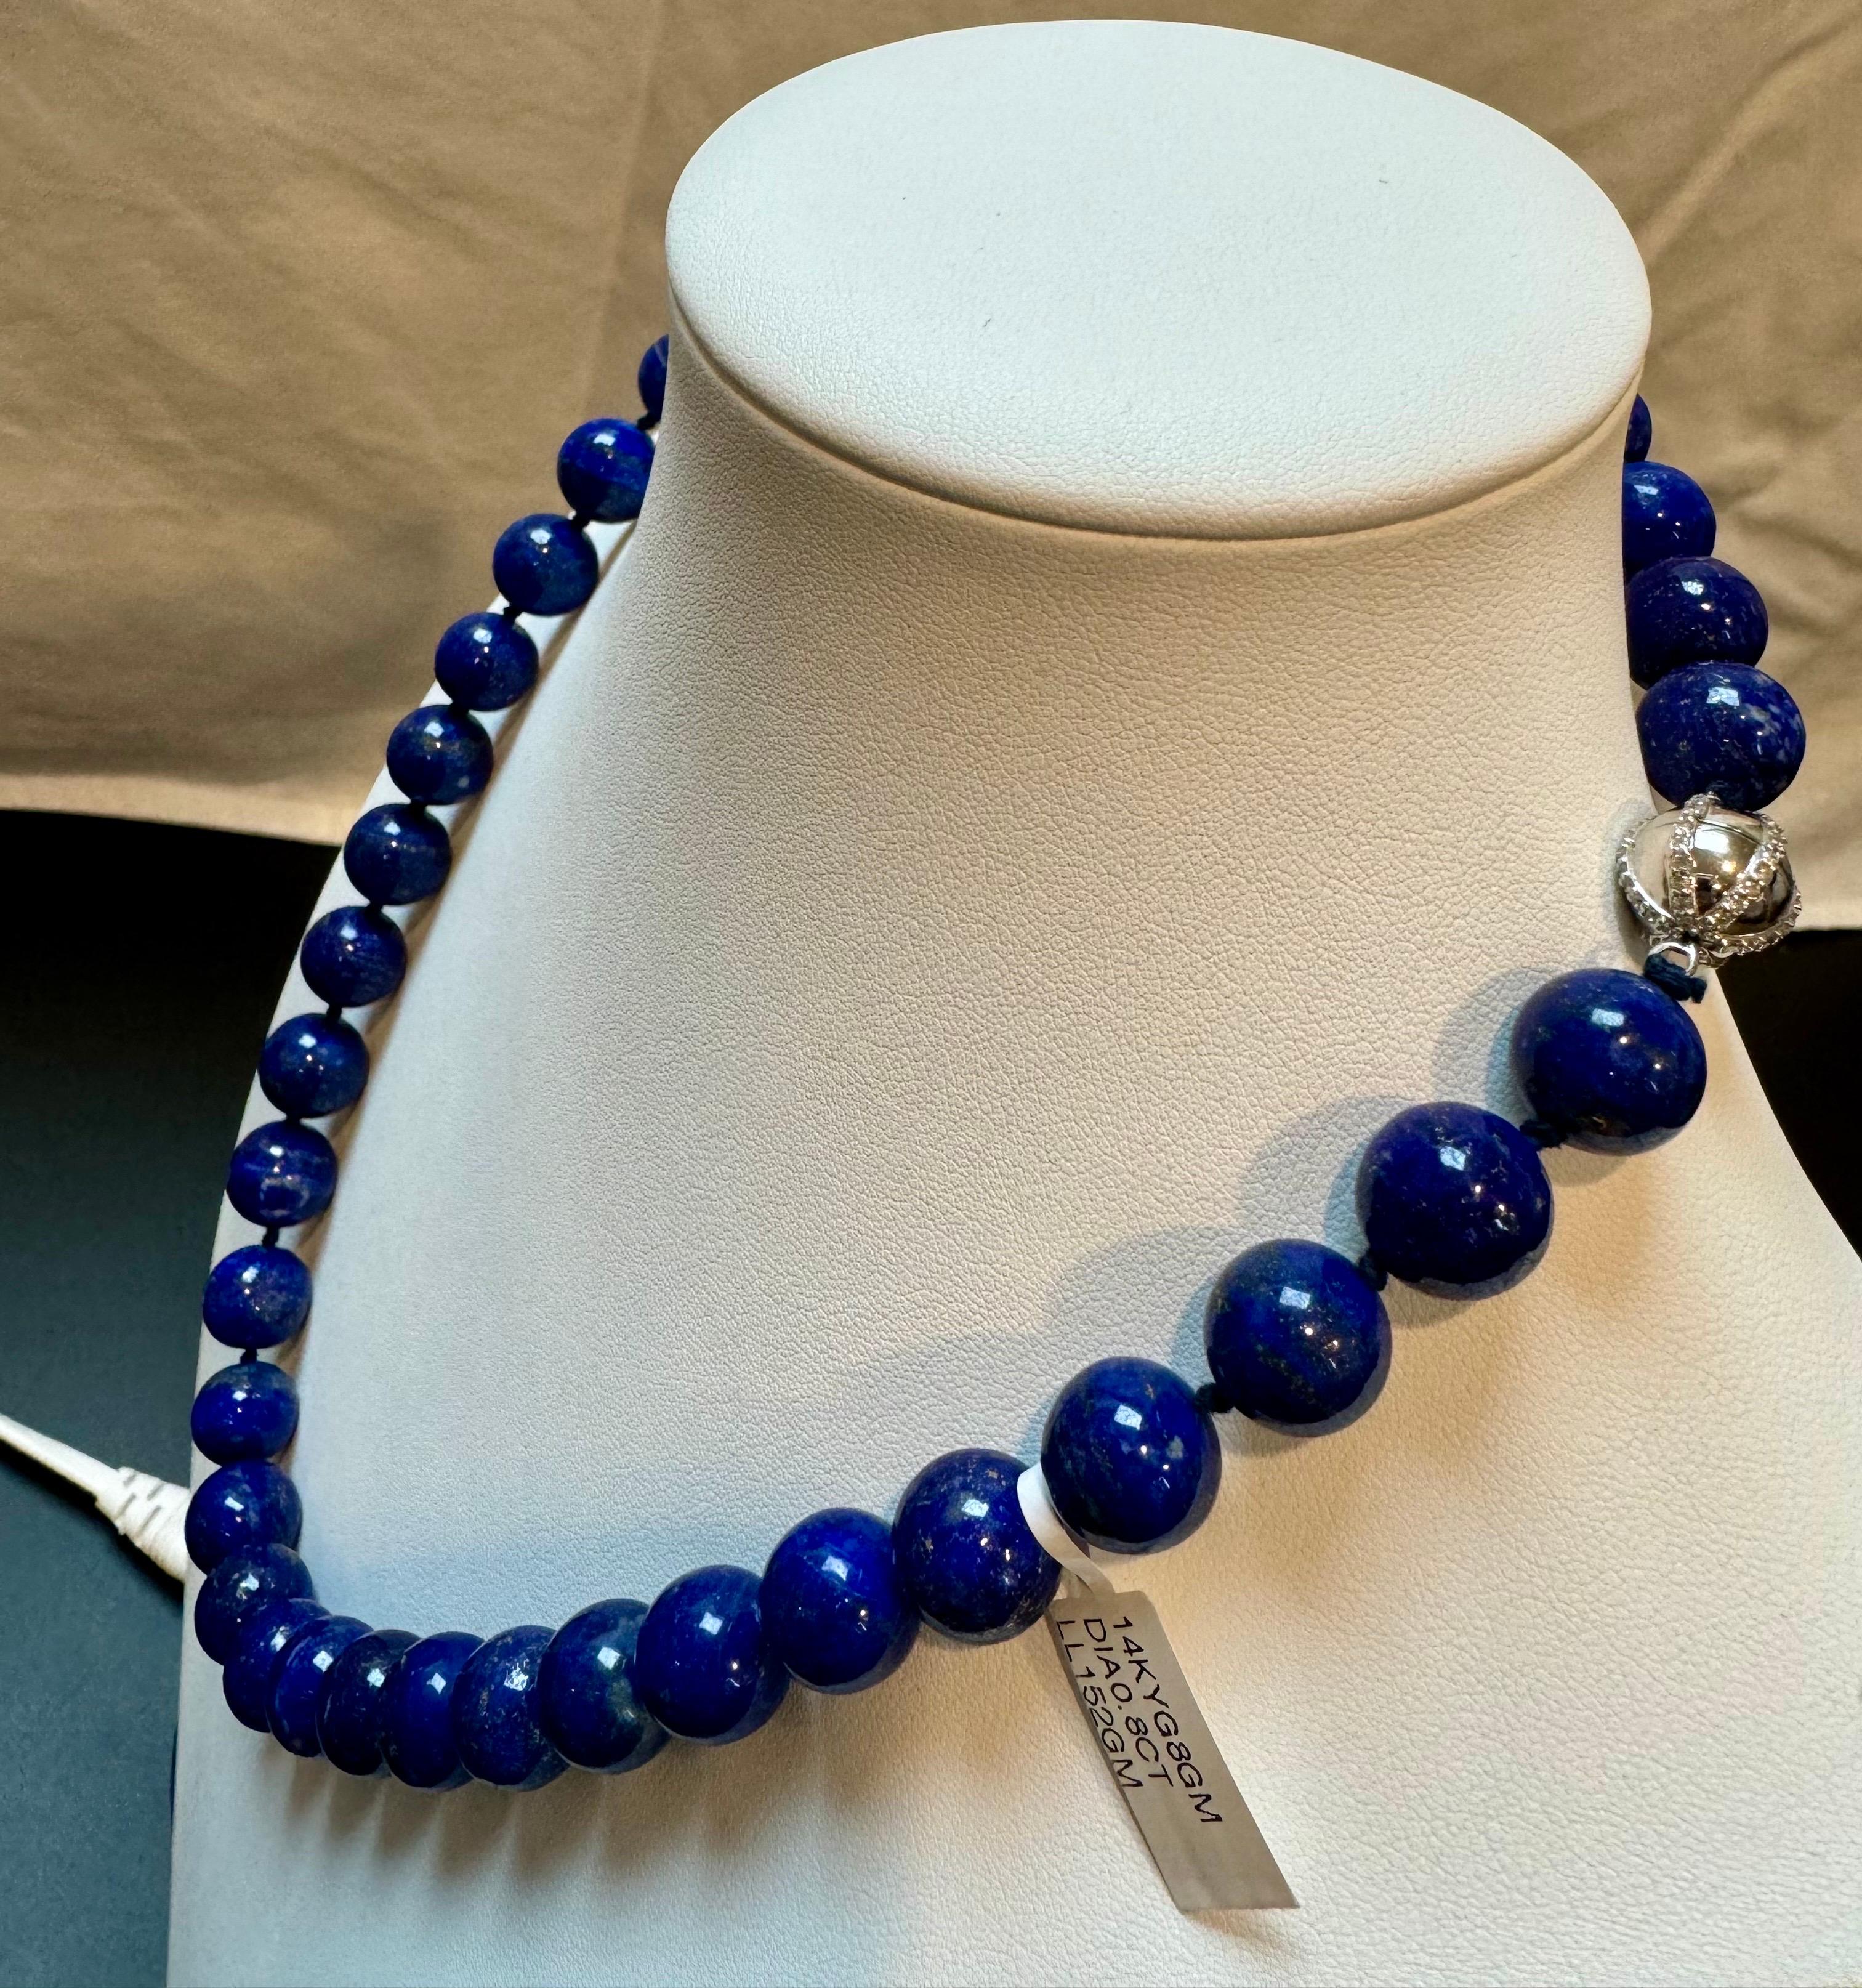 Vintage Lapis Lazuli Single Strand Necklace with 0.8 Carat Diamond Ball Clasp in 14 Karat White Gold
This marvelous vintage Lapis Lazuli necklace features 1 row of luscious huge Beads
(measuring approximately from 15 MM to 13 MM) . It is a